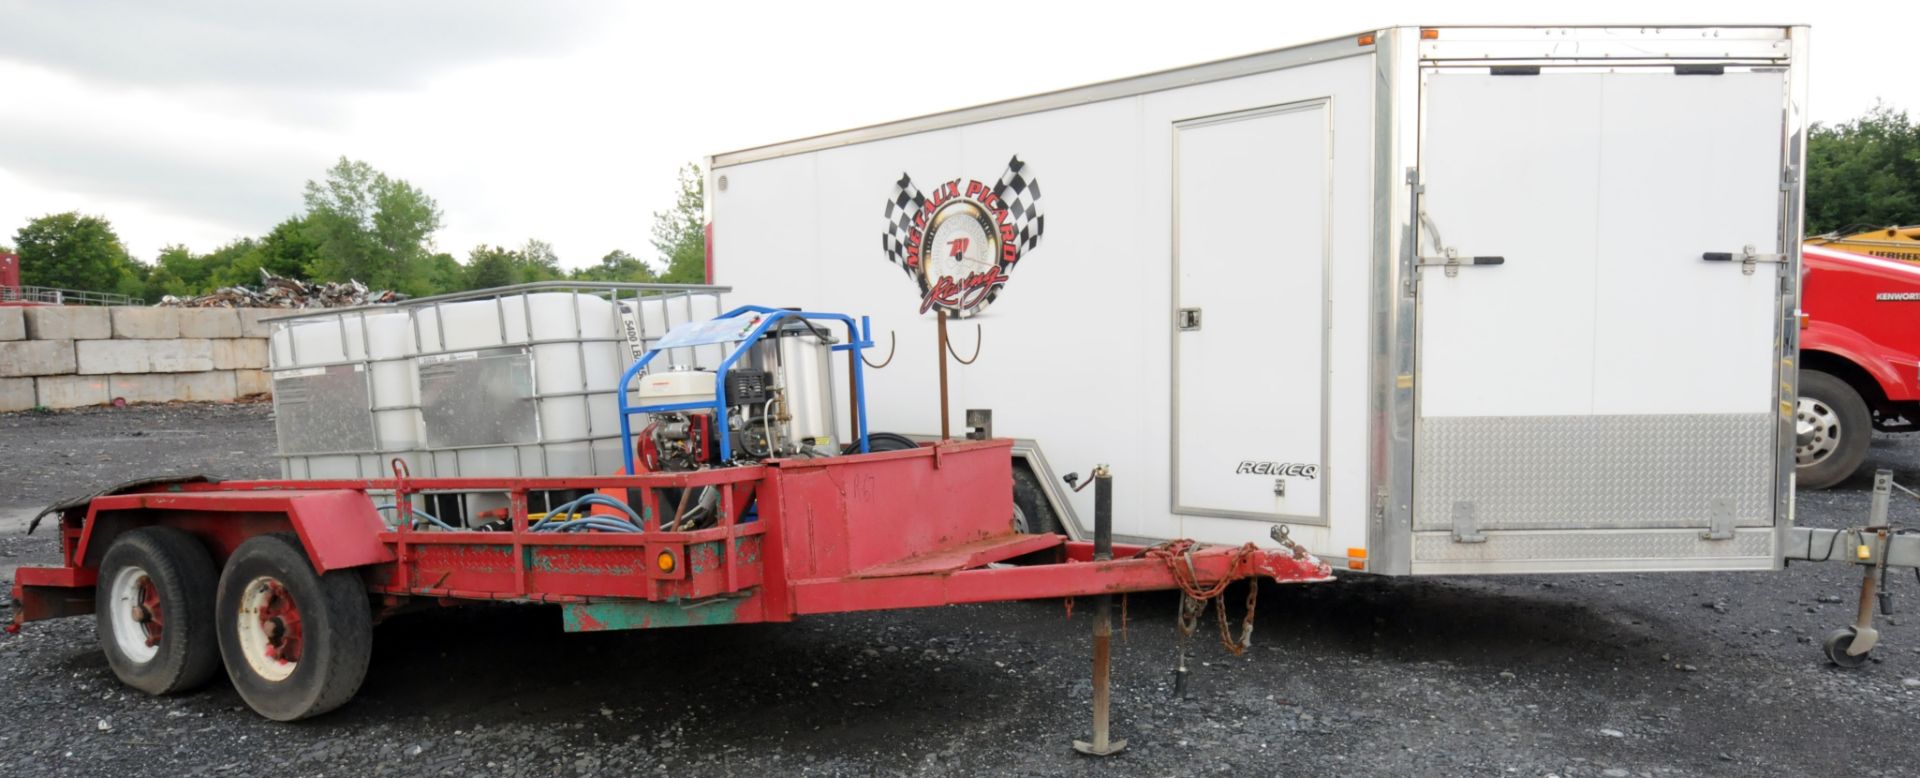 MFG. UNKNOWN TANDEM AXLE FLATBED TRAILER VIN: N/A (NO CONTENTS)